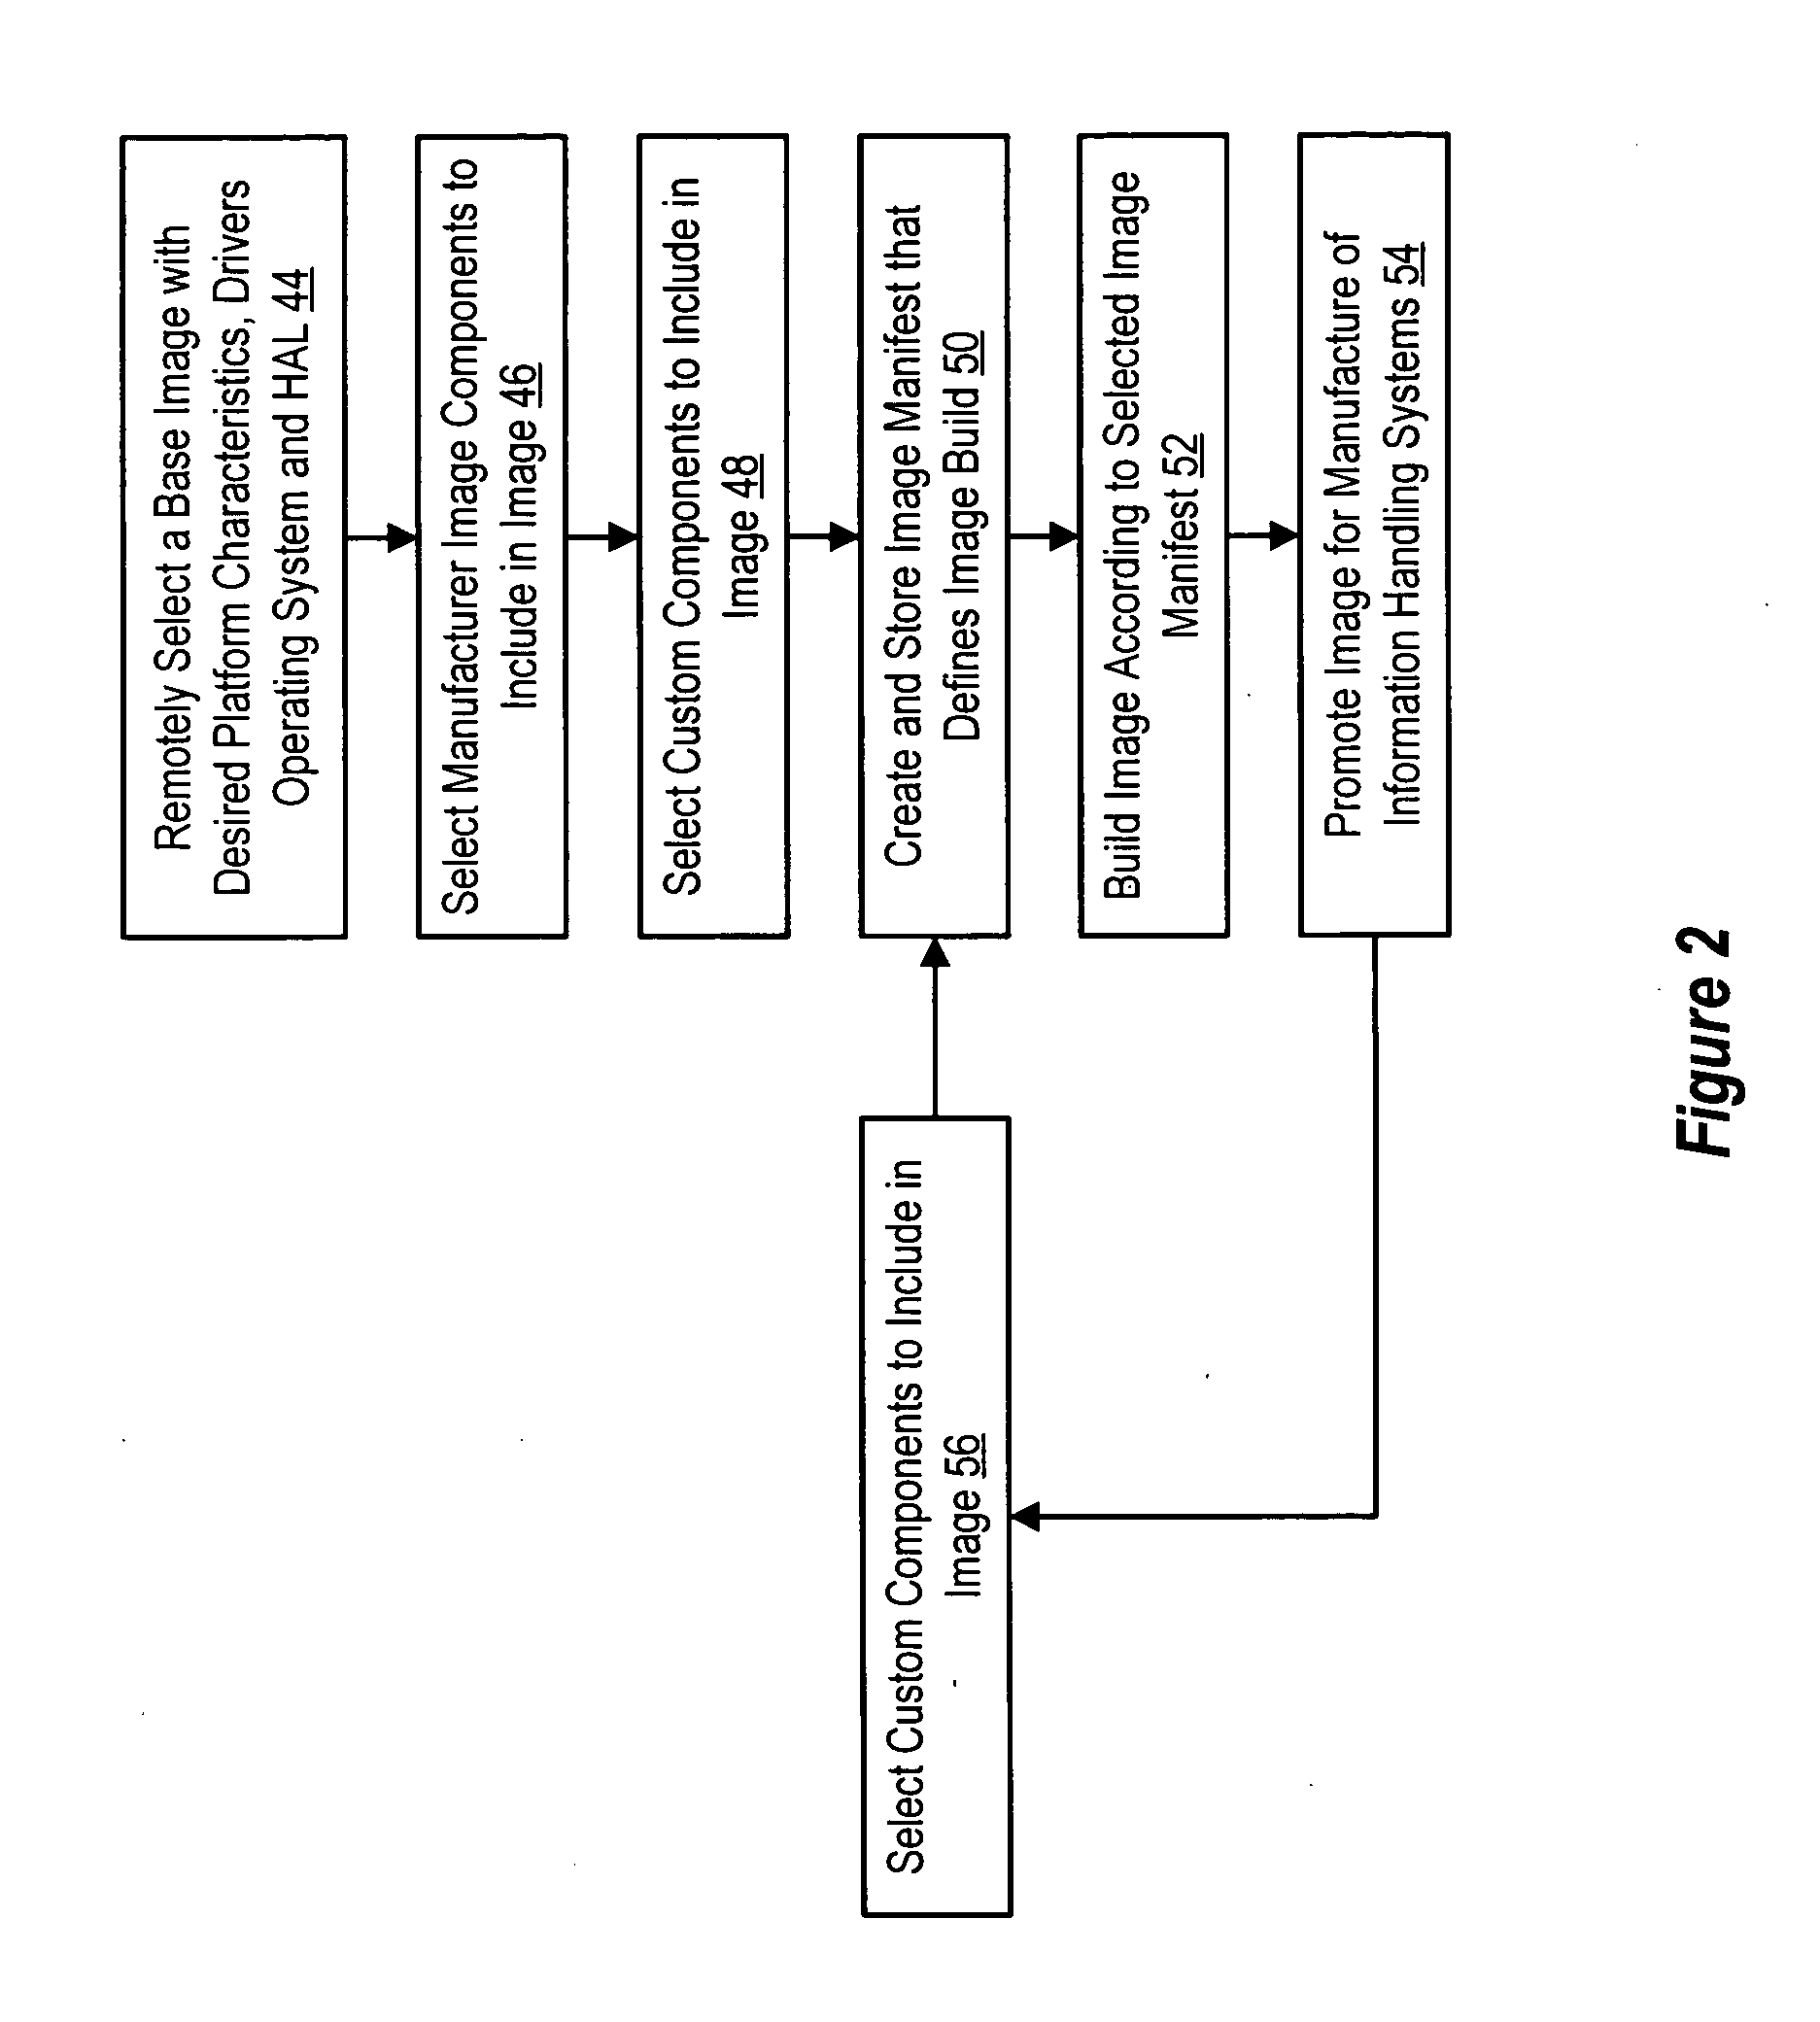 System and method for remotely building an information handling system manufacturing image